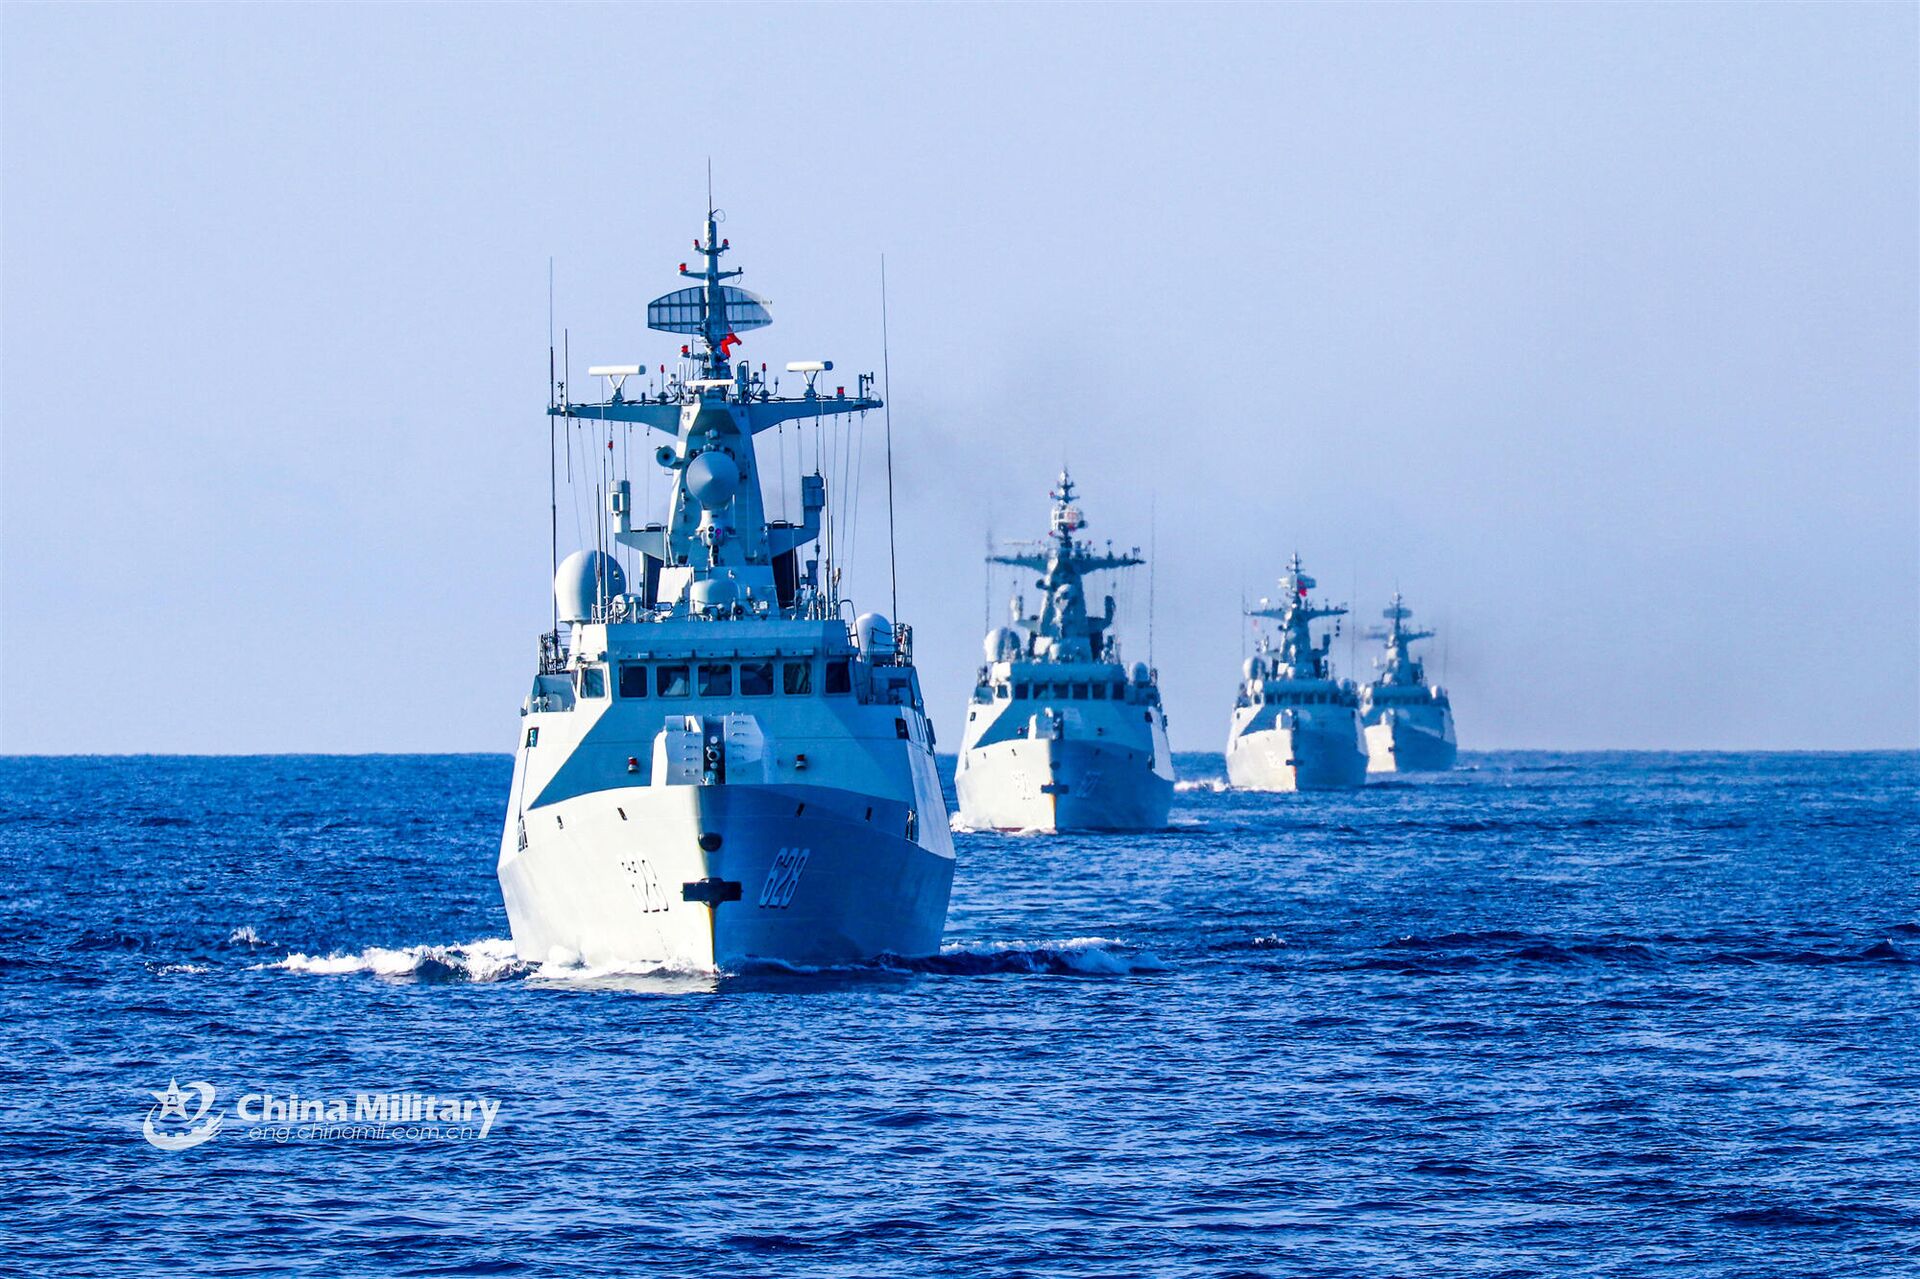 The frigate Enshi (Hull 627), Yongzhou (Hull 628), Bazhong (Hull 625), and Wuzhou (Hull 626) steam in formation during a 9-day maritime training exercise in waters of the South China Sea in late November, 2020. They are attached to a frigate flotilla of the navy under the PLA Southern Theater Command. - Sputnik International, 1920, 09.10.2021